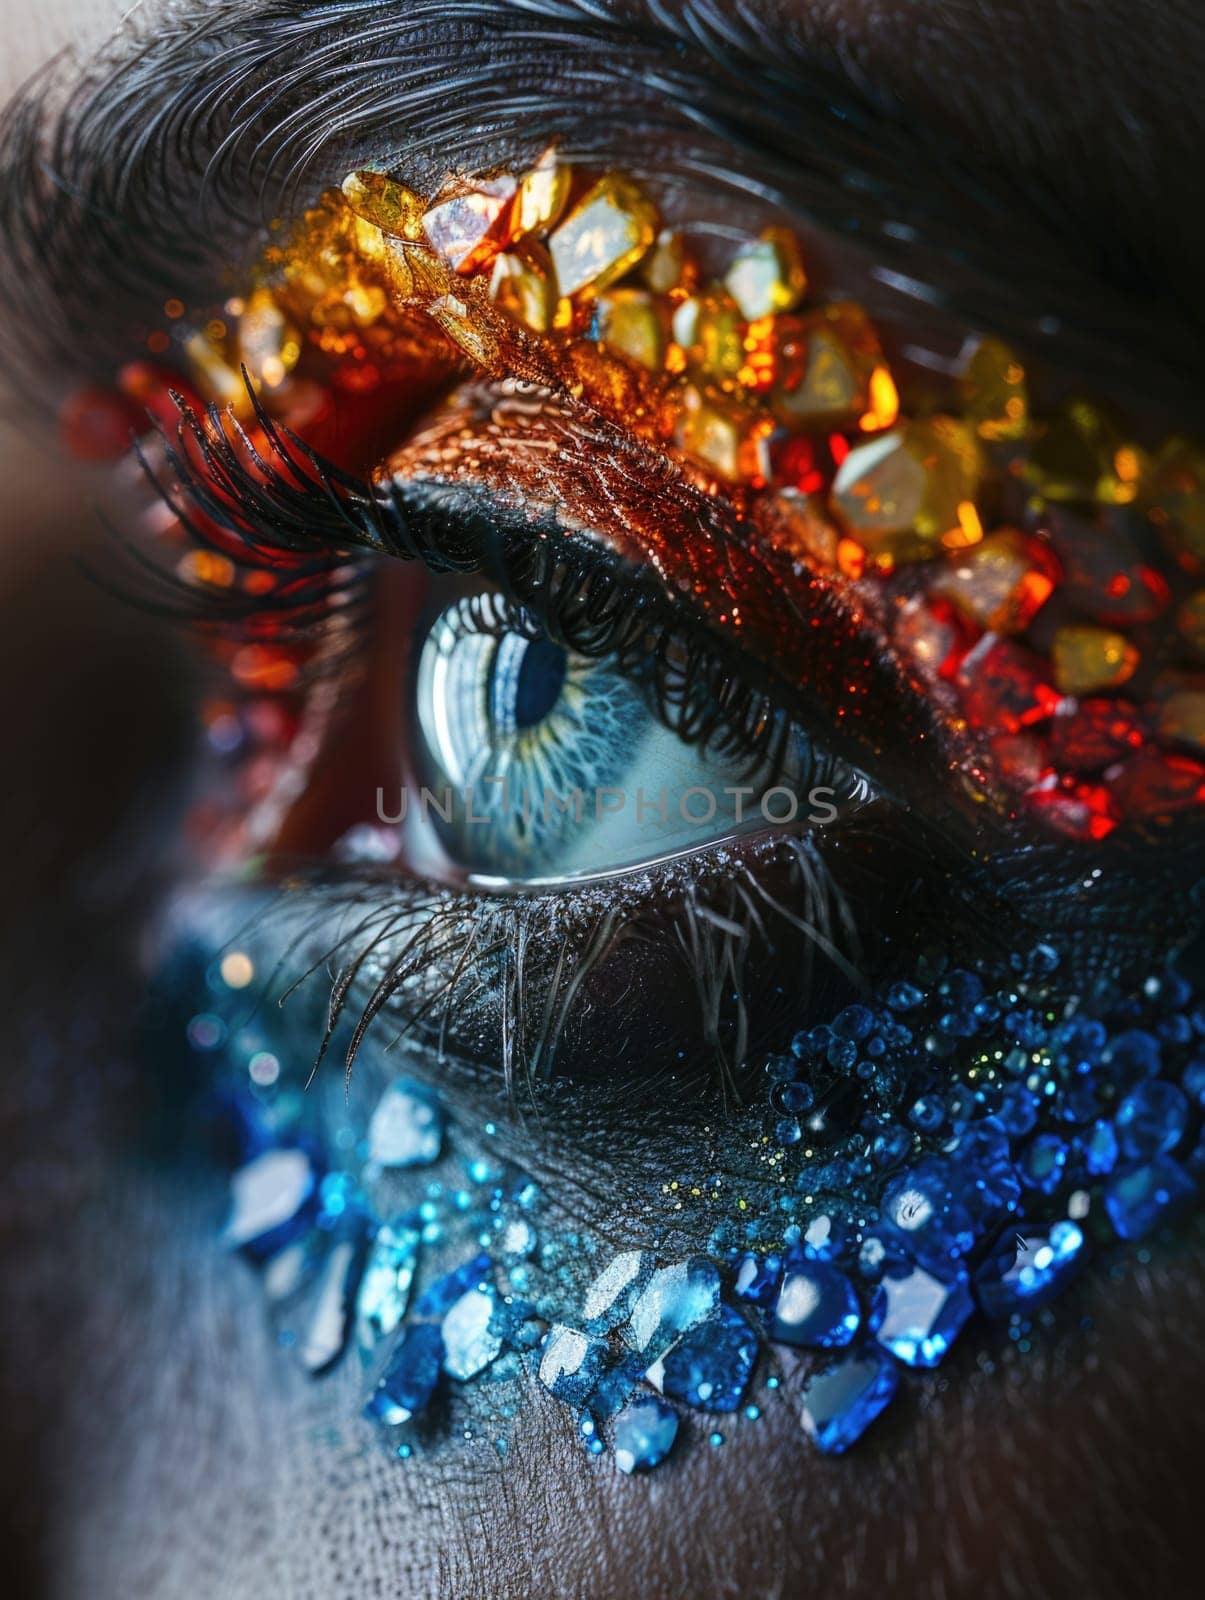 Close-Up of Persons Eye With Colorful Makeup by but_photo